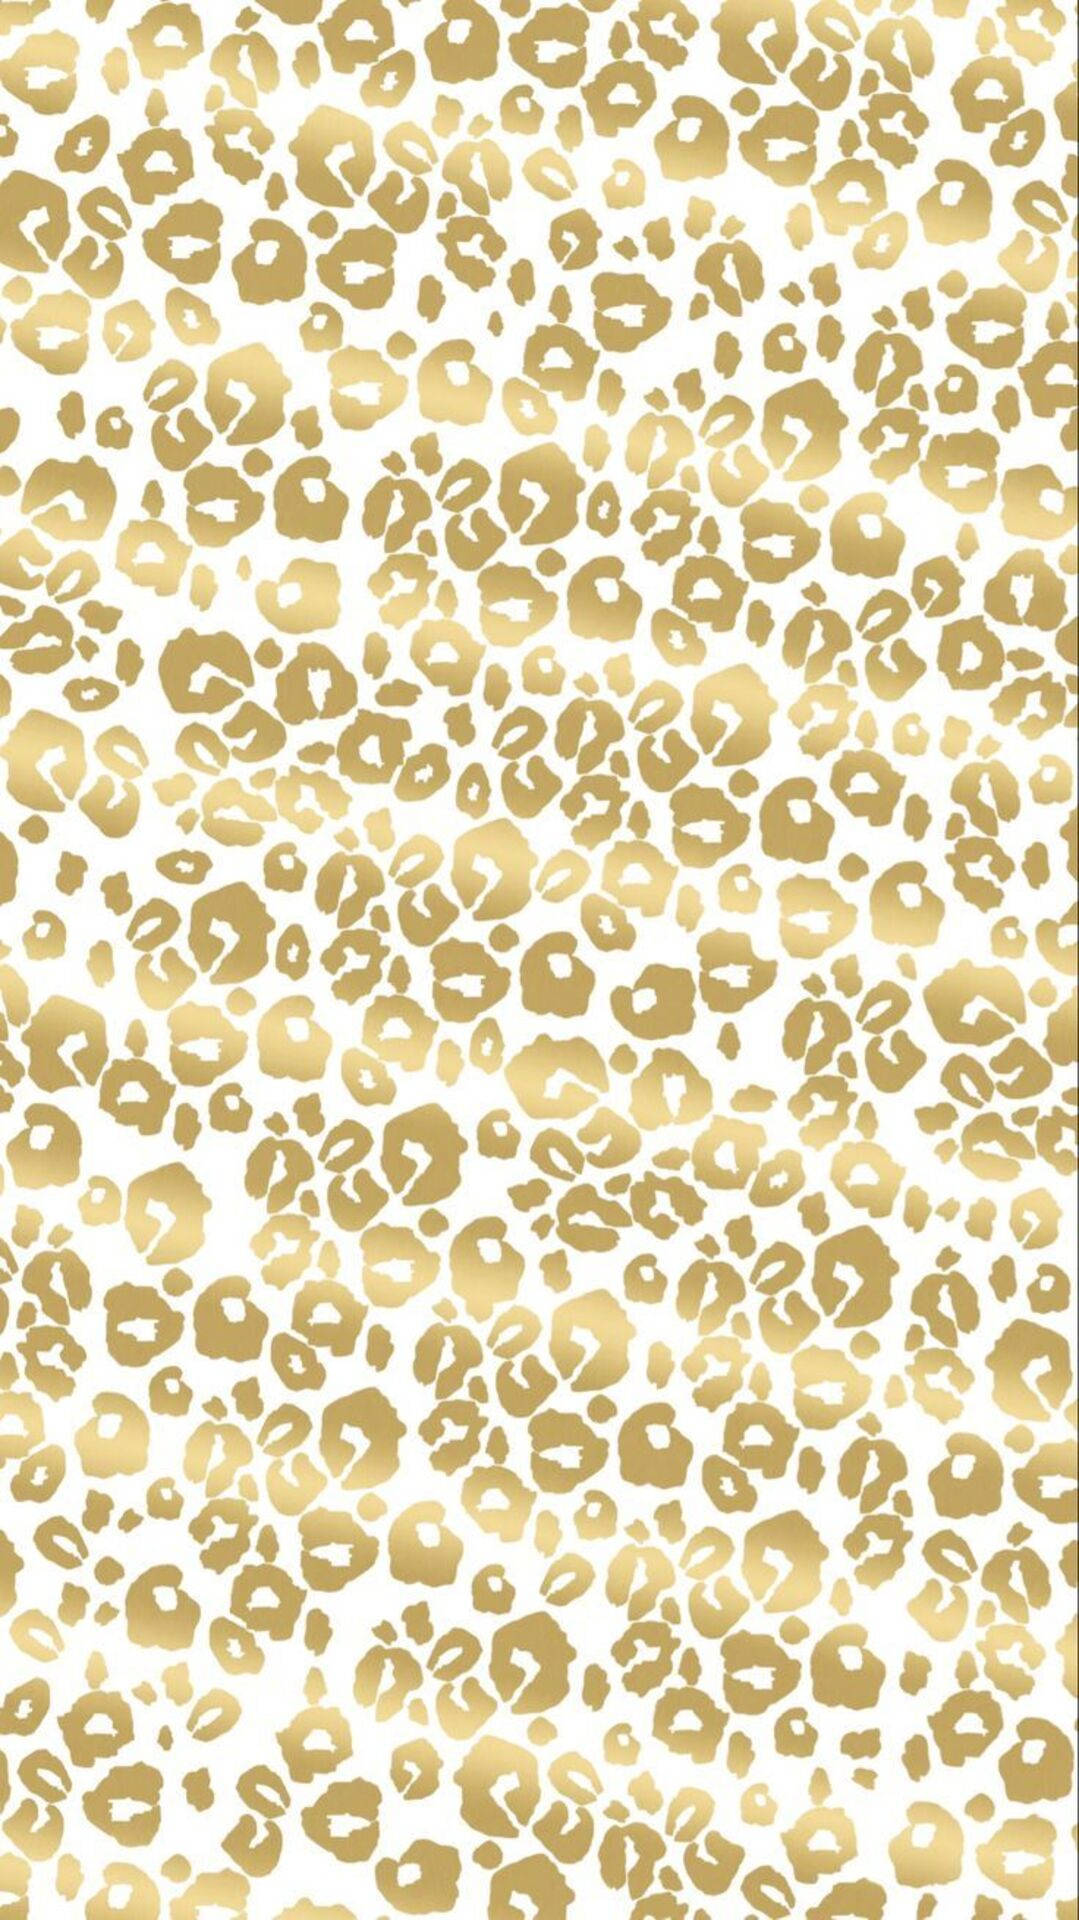 Shades Of Gold Leopard Print Background